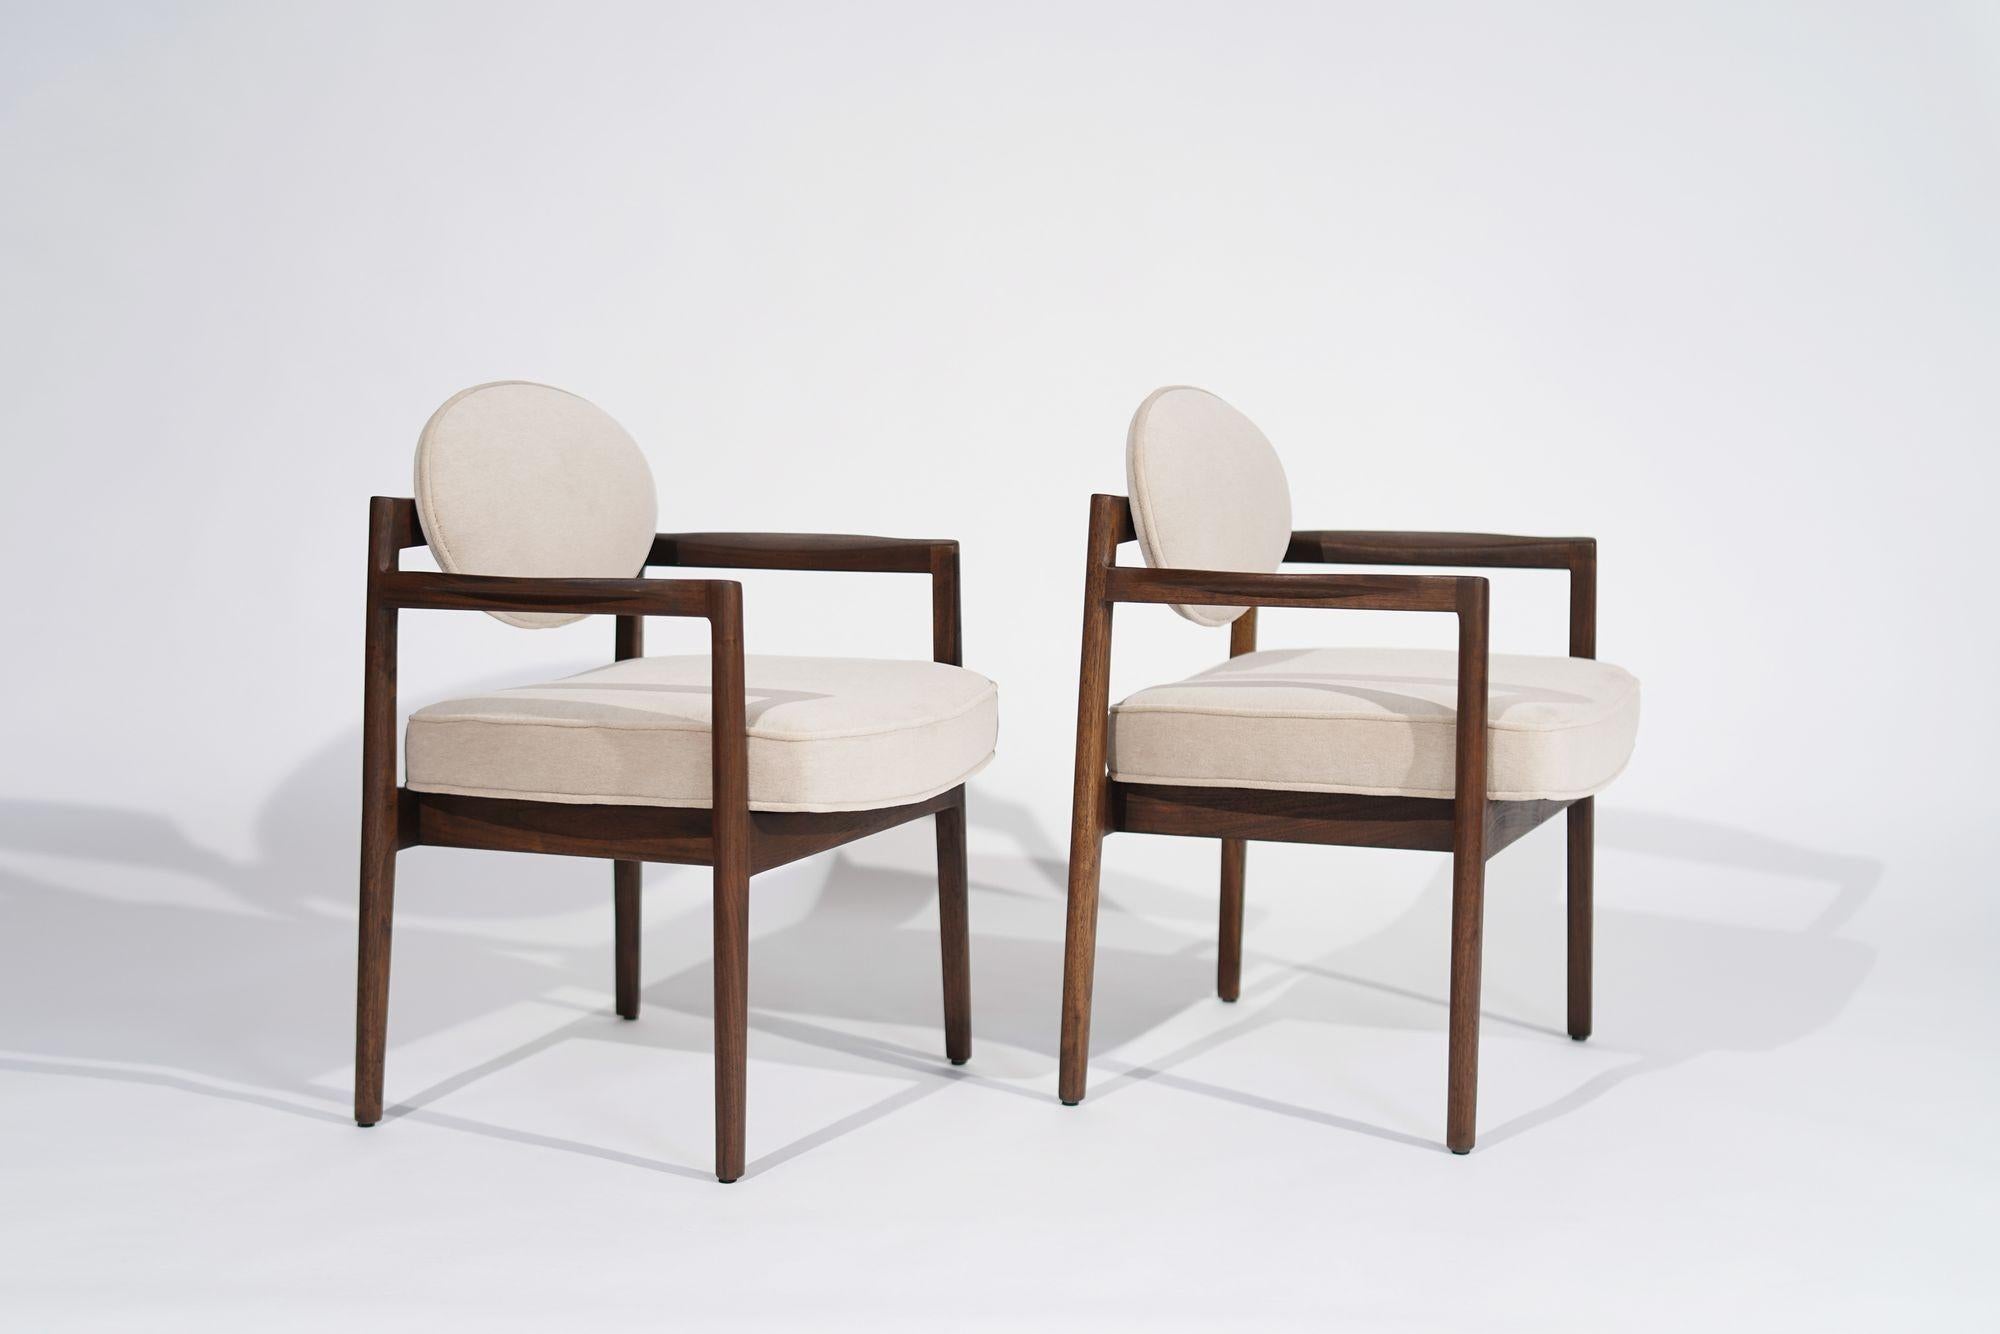 American Jens Risom Walnut Armchairs in Natural Mohair, C. 1950s For Sale